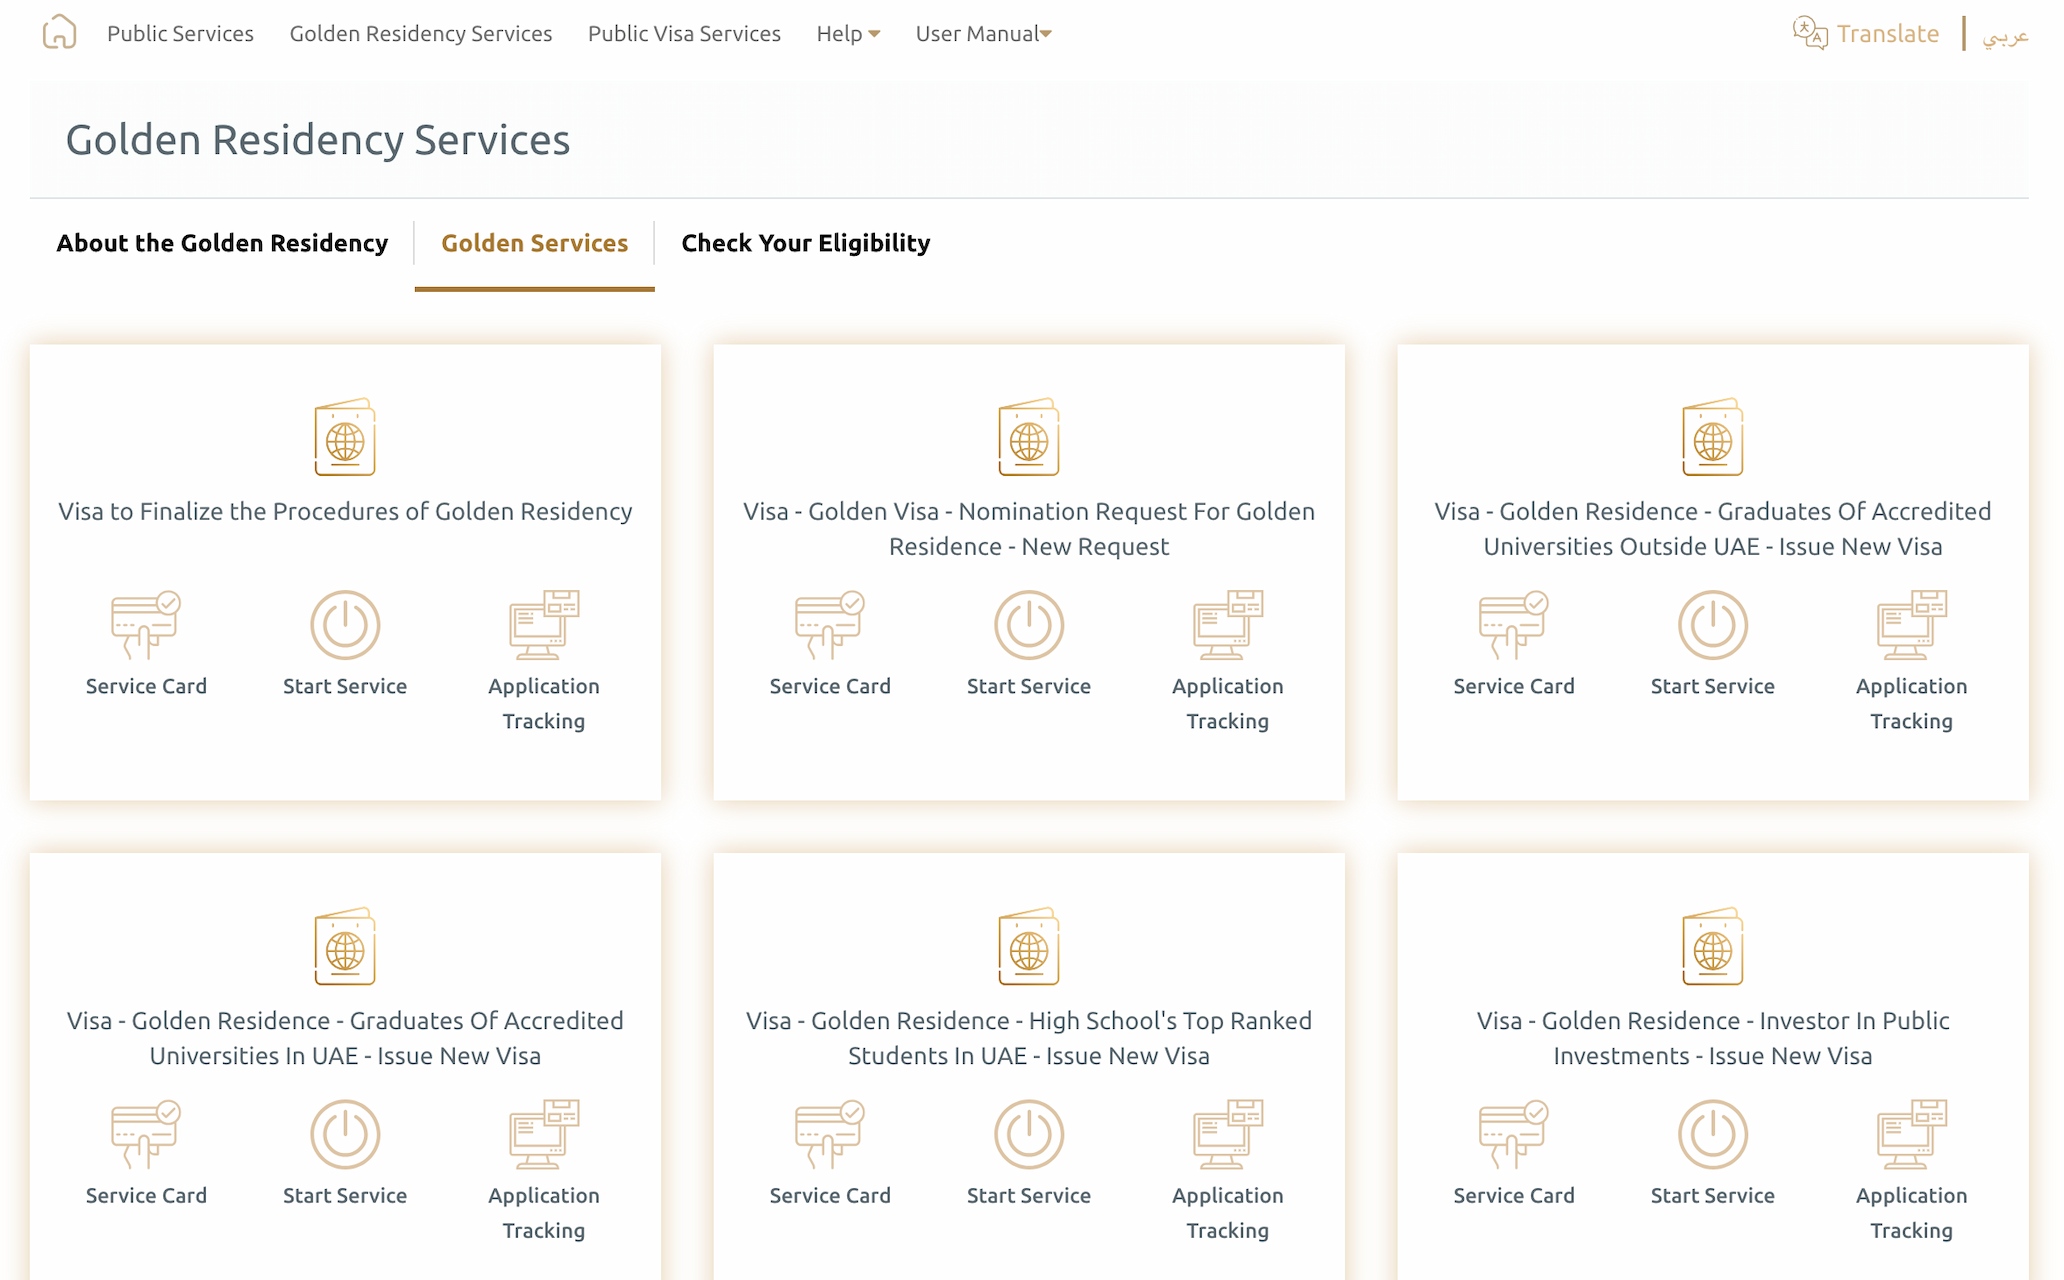 A screenshot of the ICP Smart Services Website on how to apply for a Golden Visa.